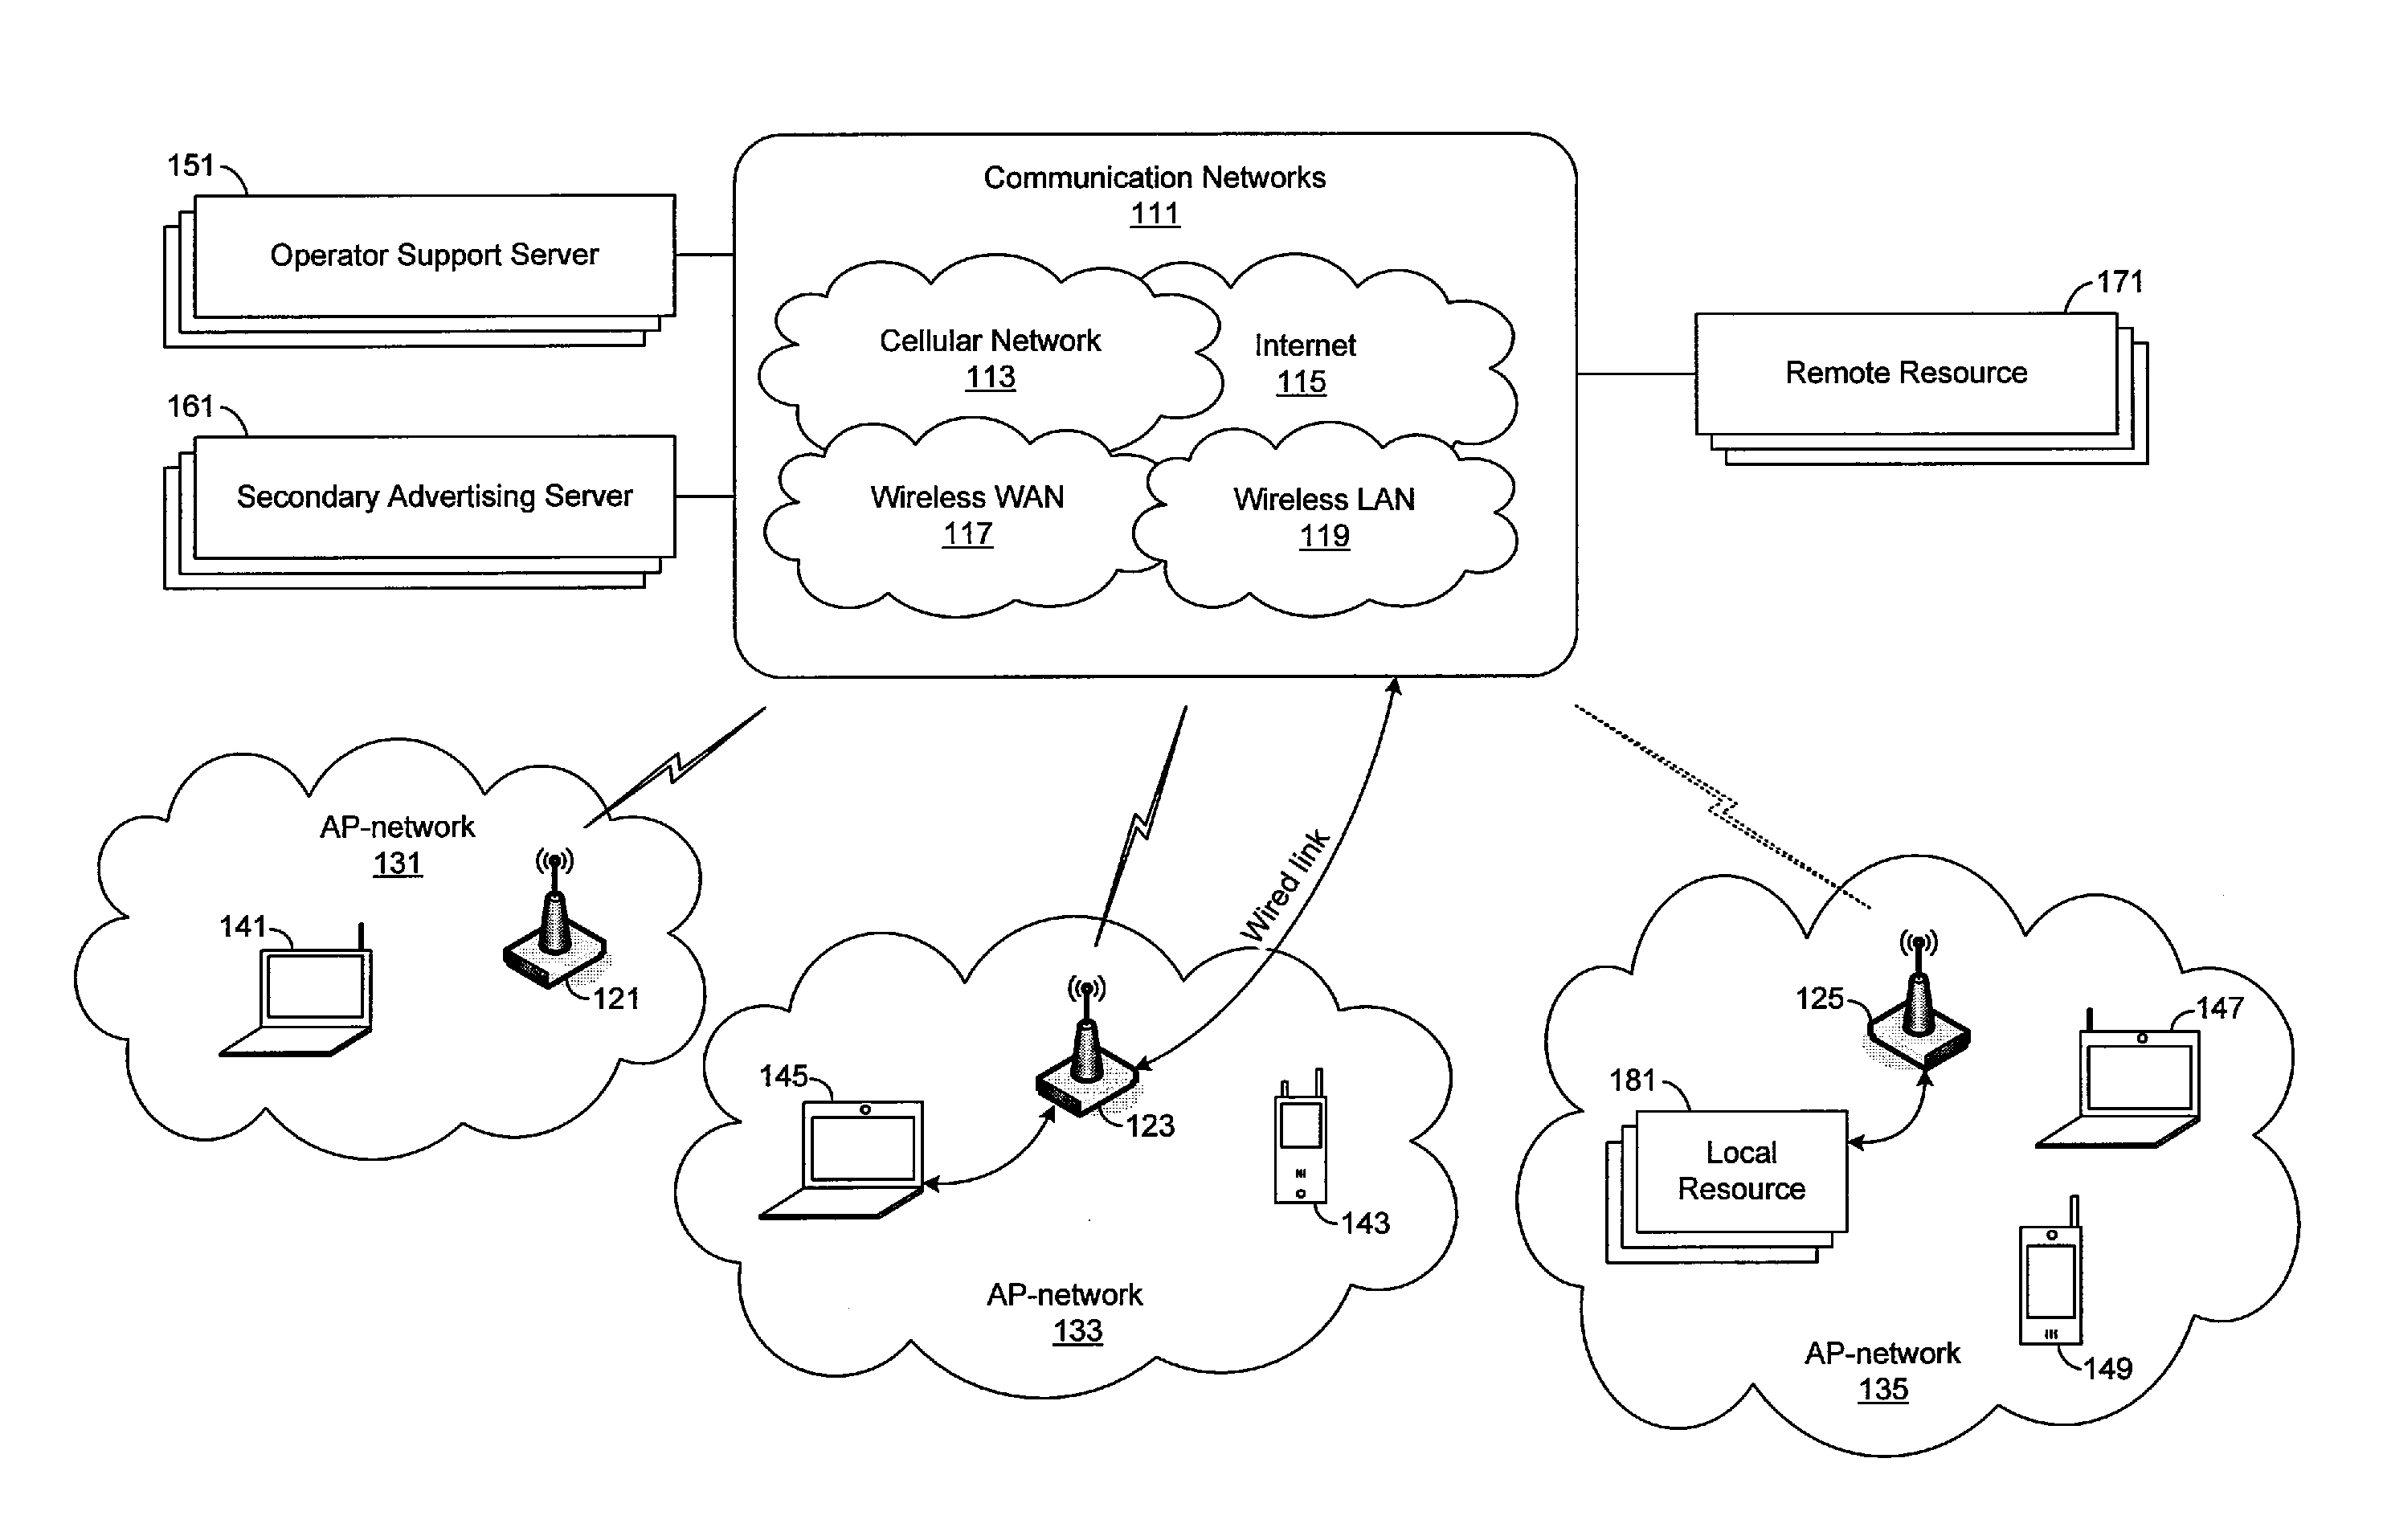 Providing private access point services in a communication system